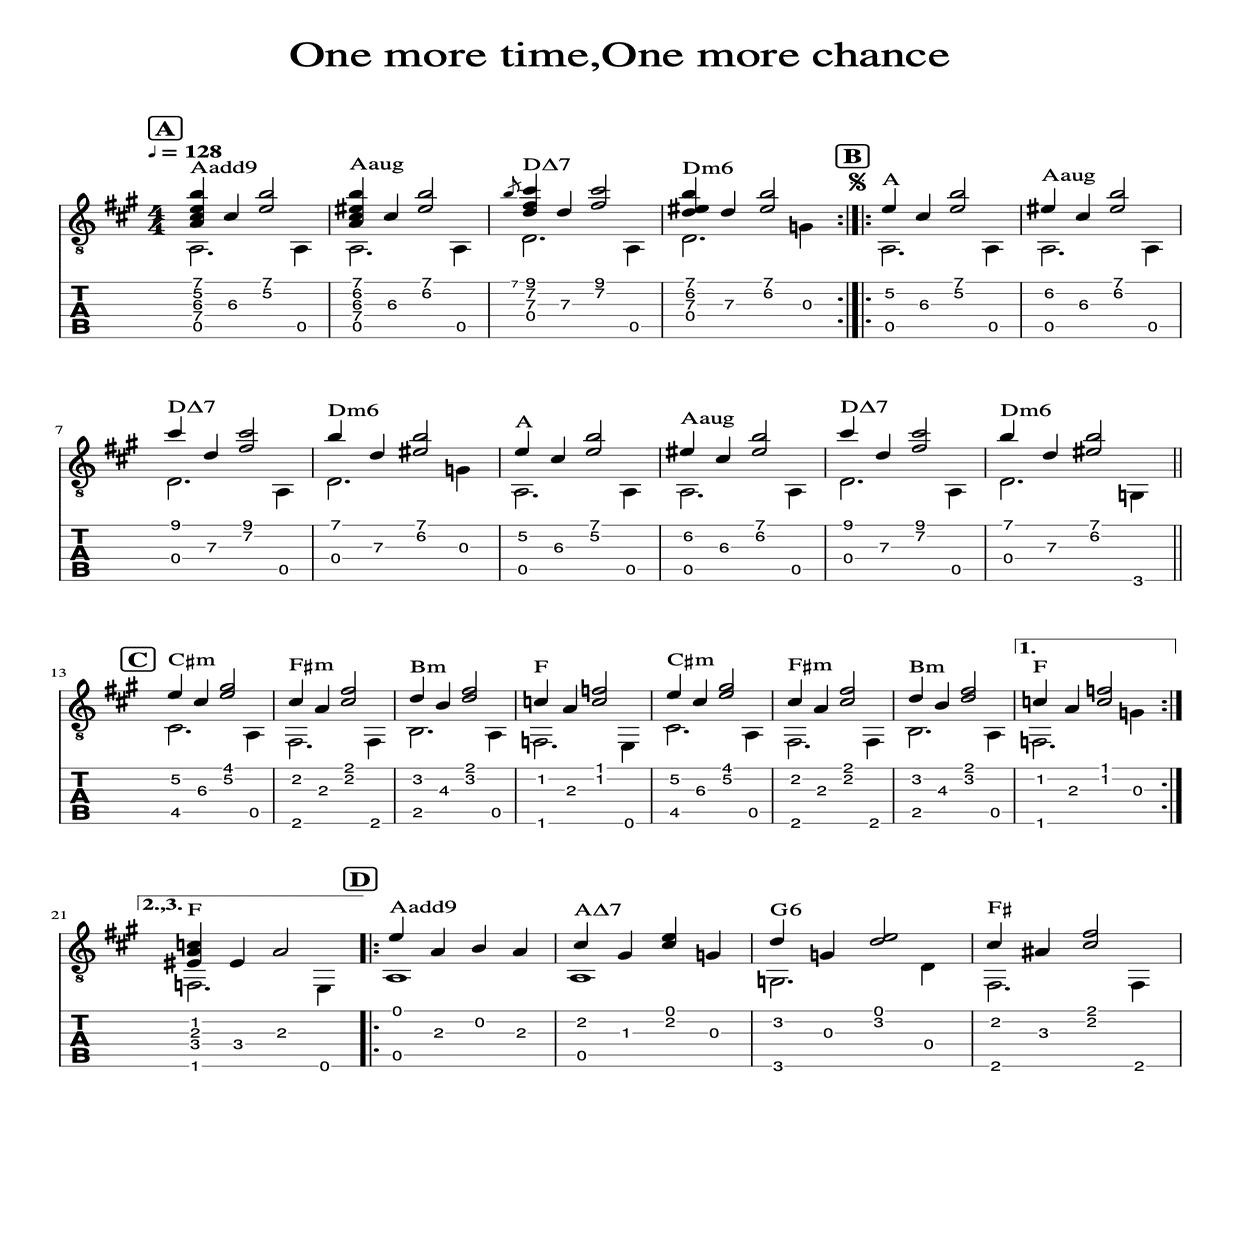 One more time,One more Chance/山崎まさよし ギターtab譜｜慎悟